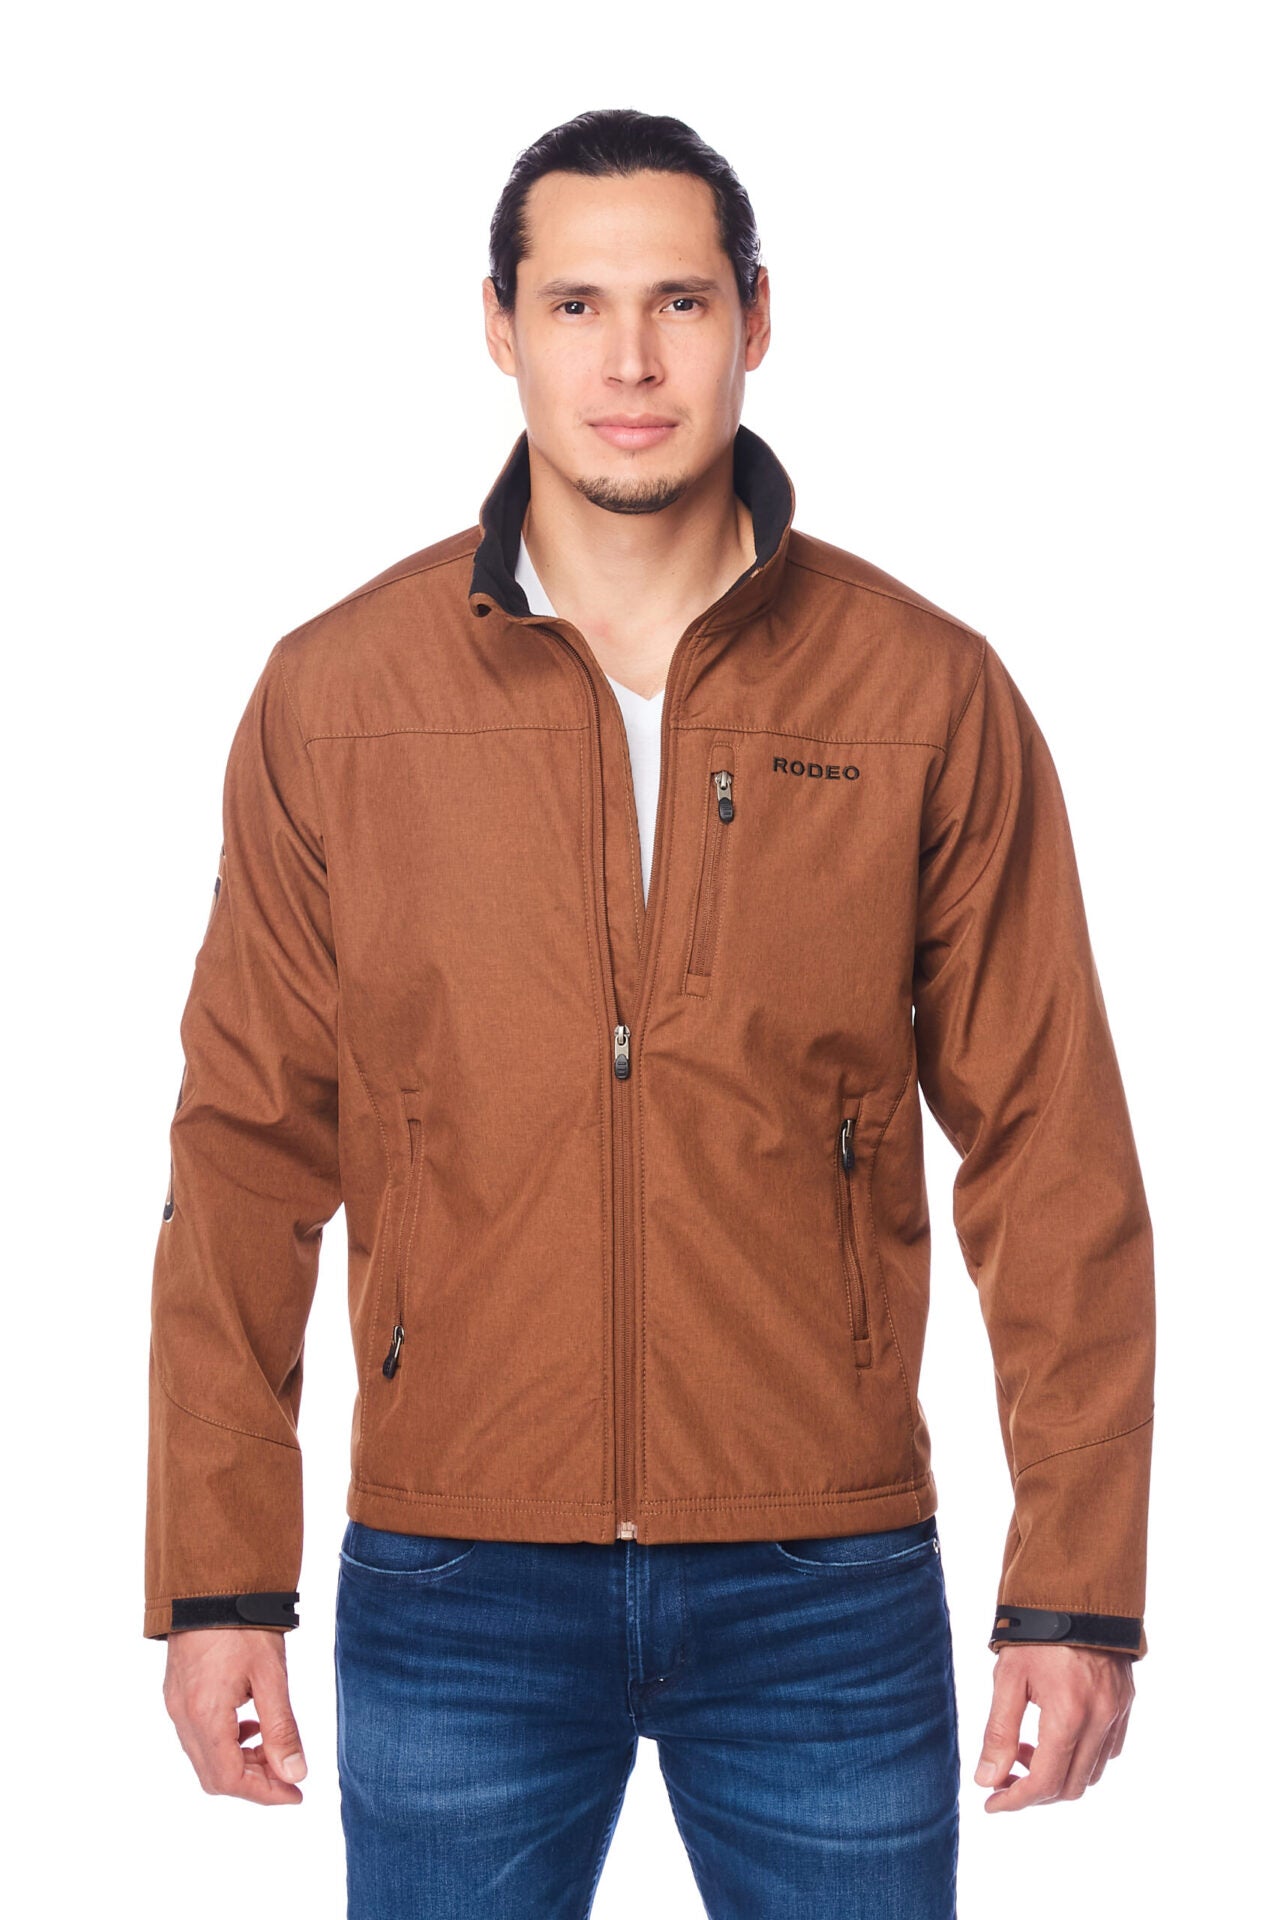  Men's High-Quality Soft Shell Bonded Jacket With Contrast Fleeceand Rodeo Embroidery-COGNAC-BLACK